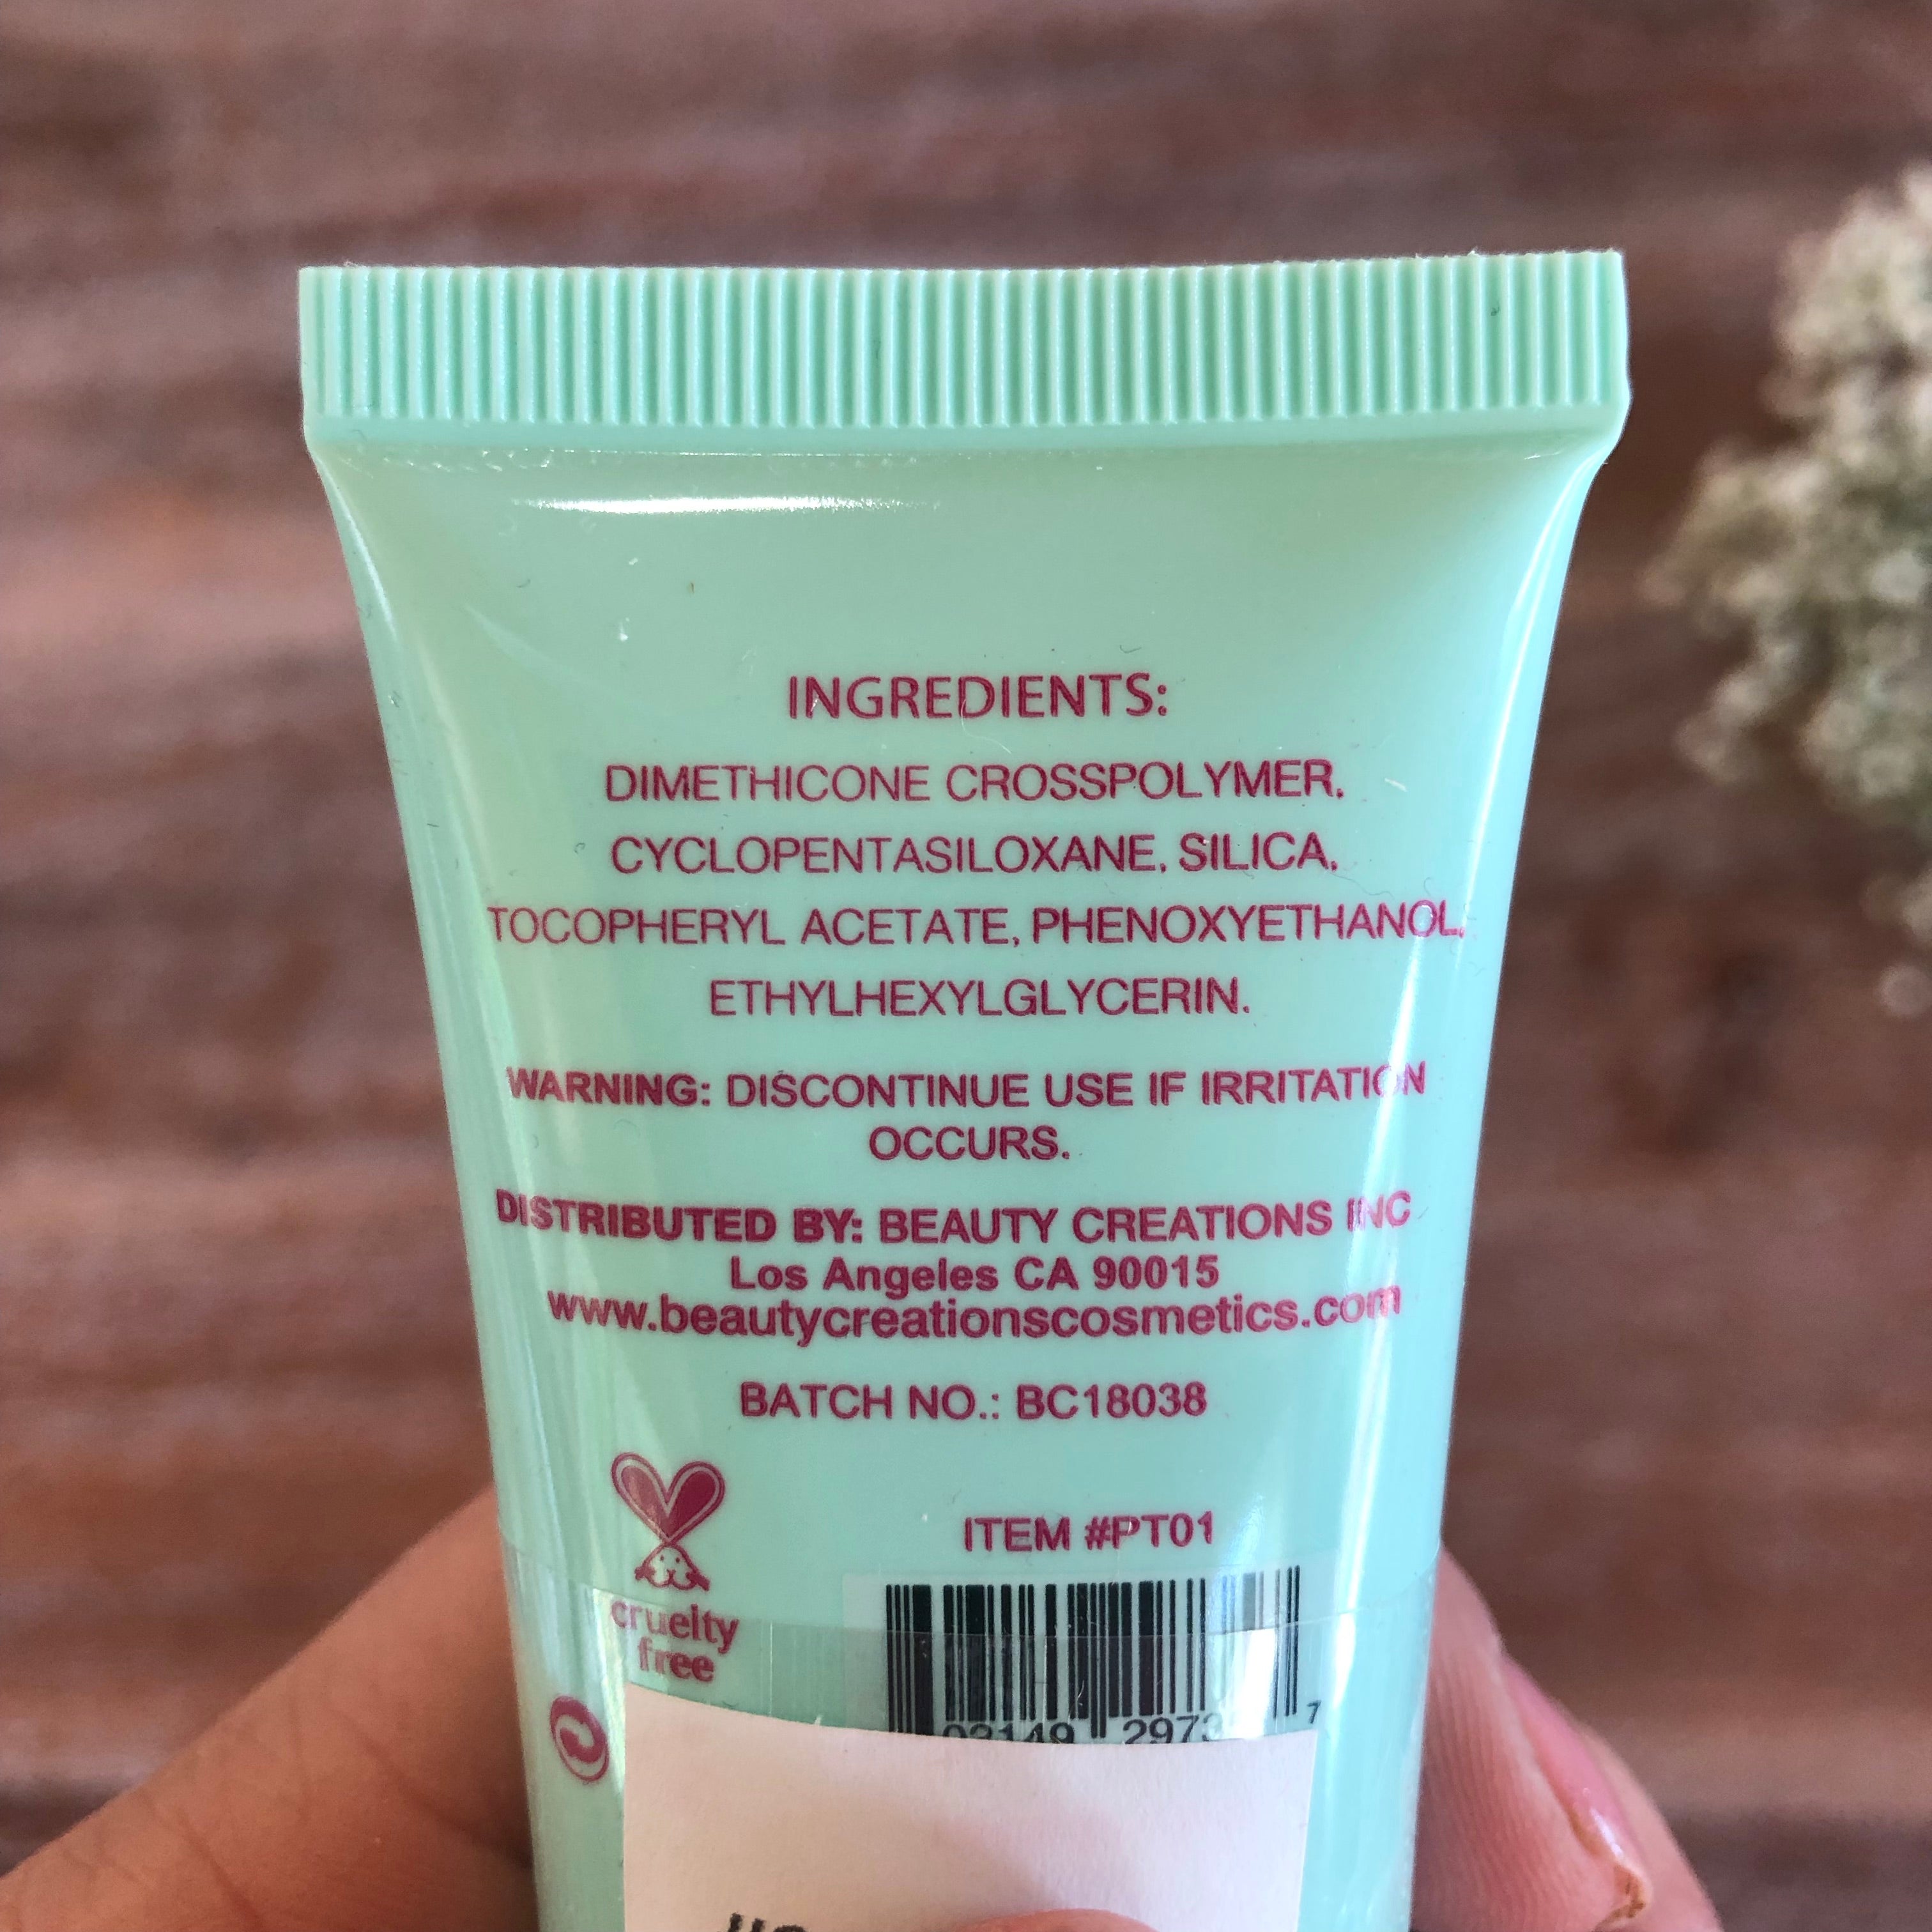 Beauty Creations | Poreless Face Primer - Giddy Up Glamour Boutique